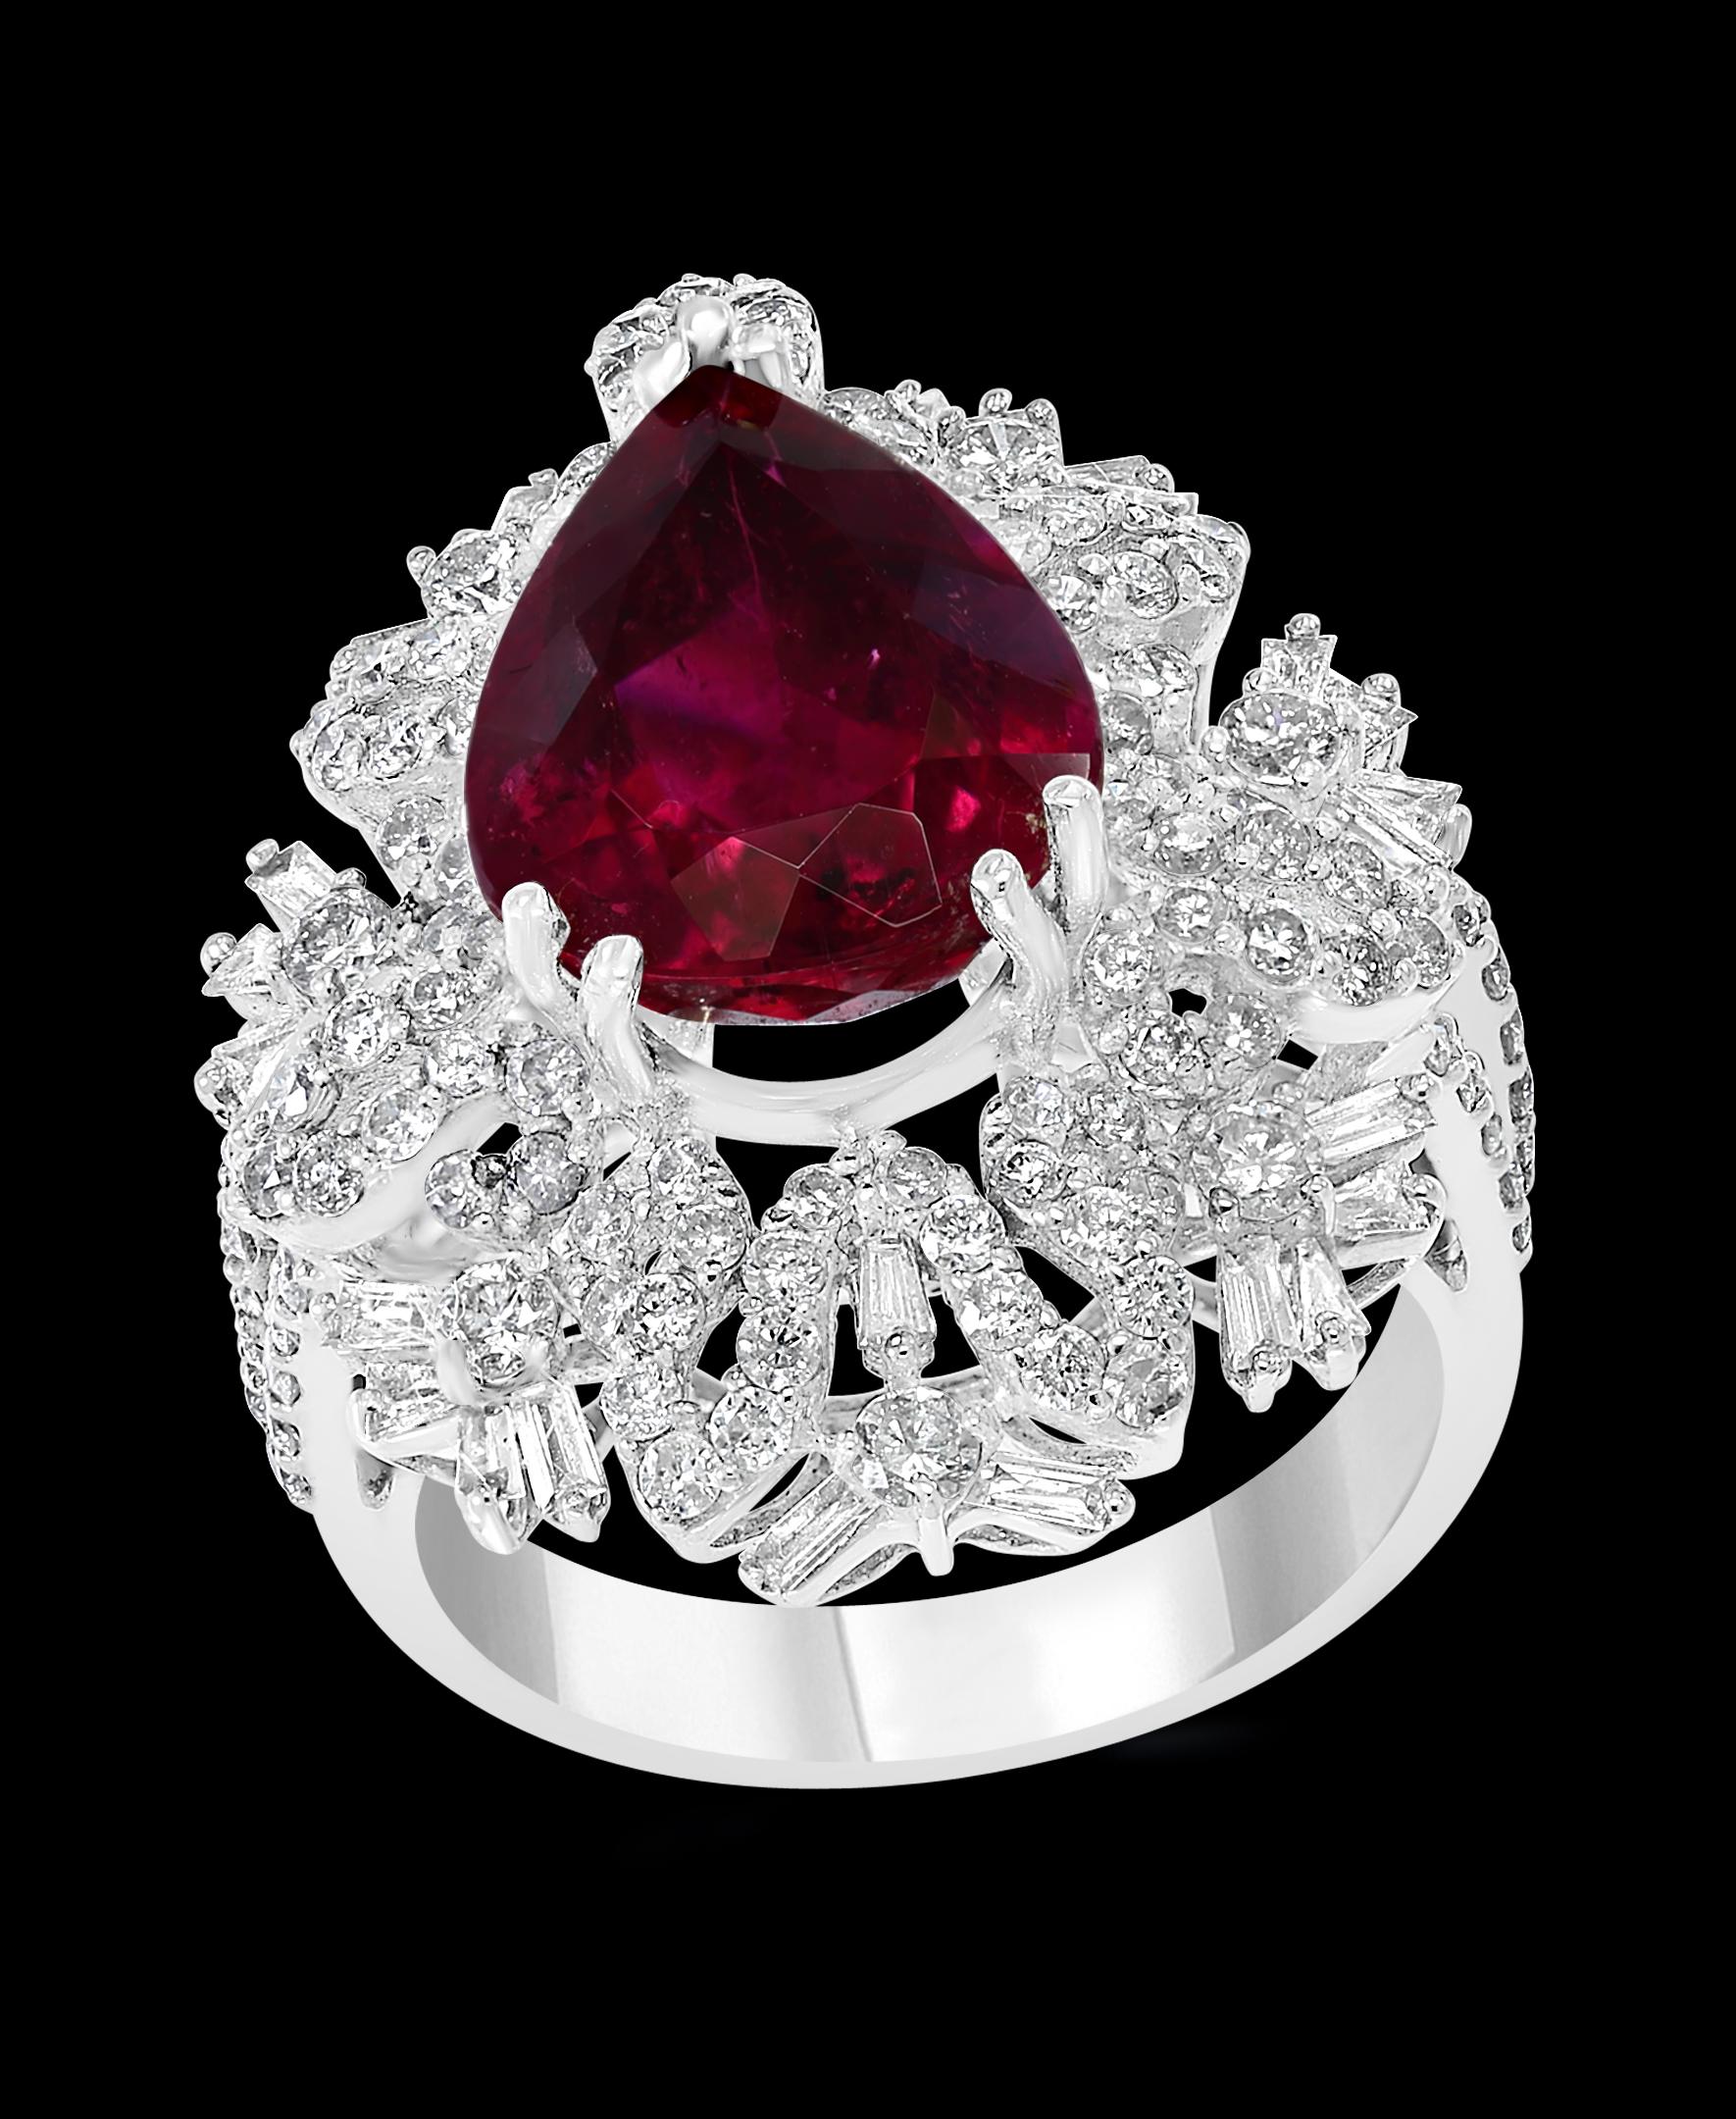 A classic, Cocktail ring 
4 Carat of very clean Rubellite in Pear shape and Diamond Ring
Gold: 18 carat White gold 
Weight: 9 gram
Ring Size 7
Diamonds: approximate 2.5 Carat 
 Very good value ! 

Please look at the all the pictures to get a better